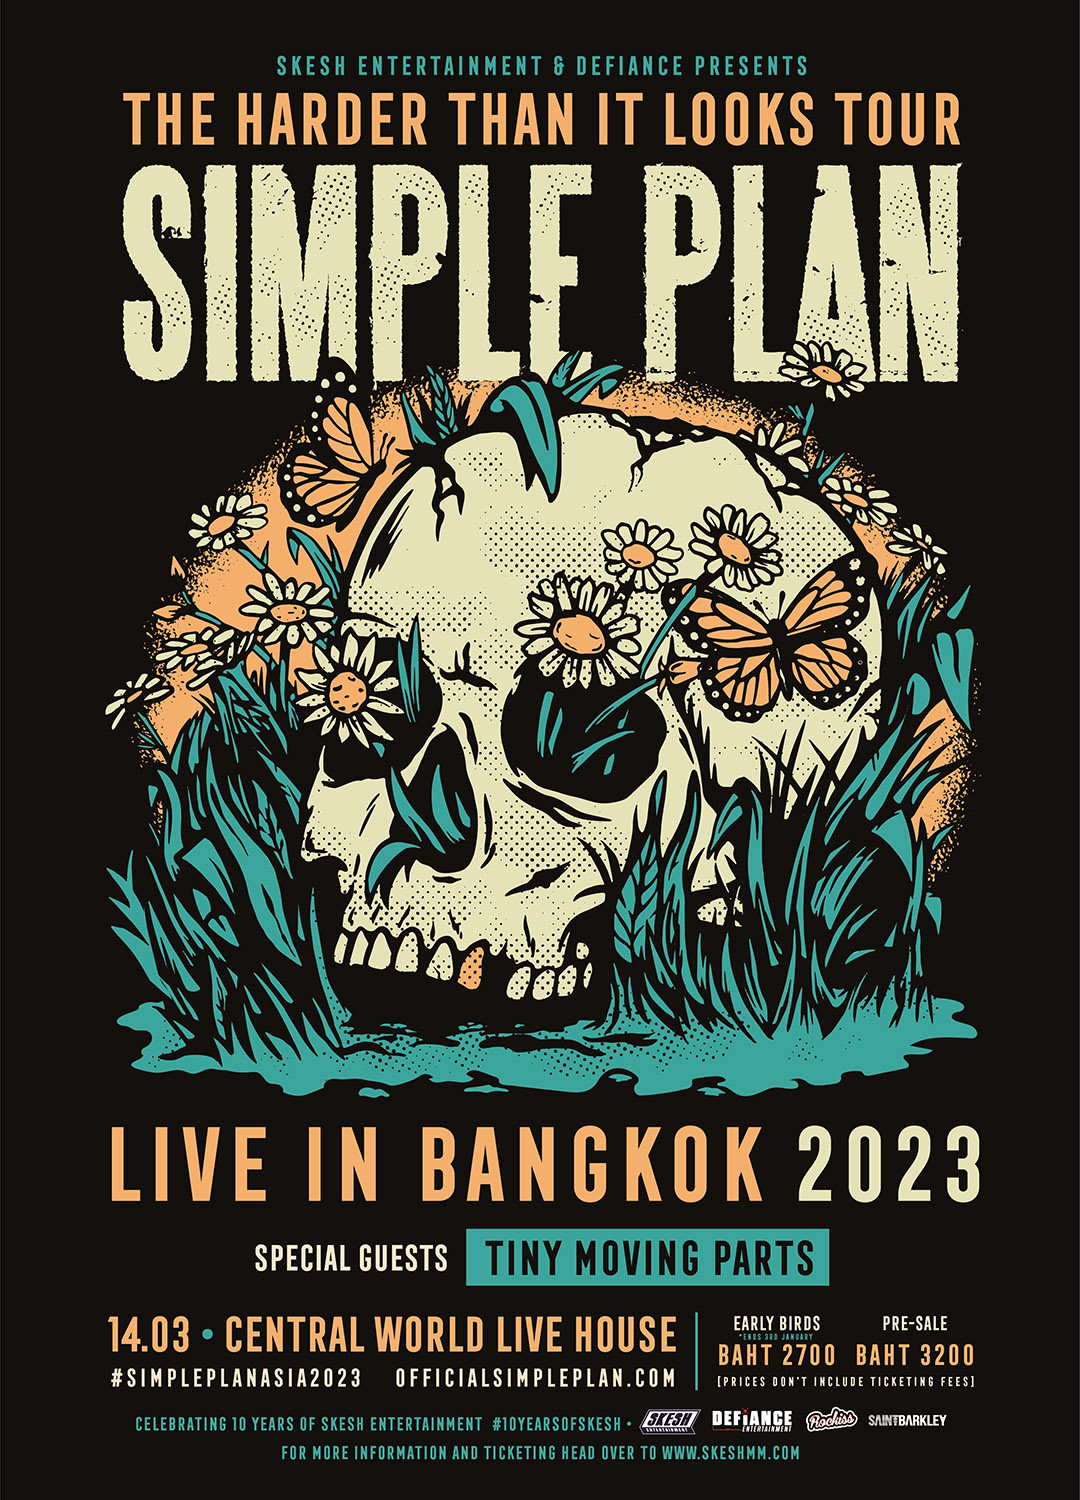 Simple Plan - The Harder Than It Looks Tour - Live In Bangkok 2023